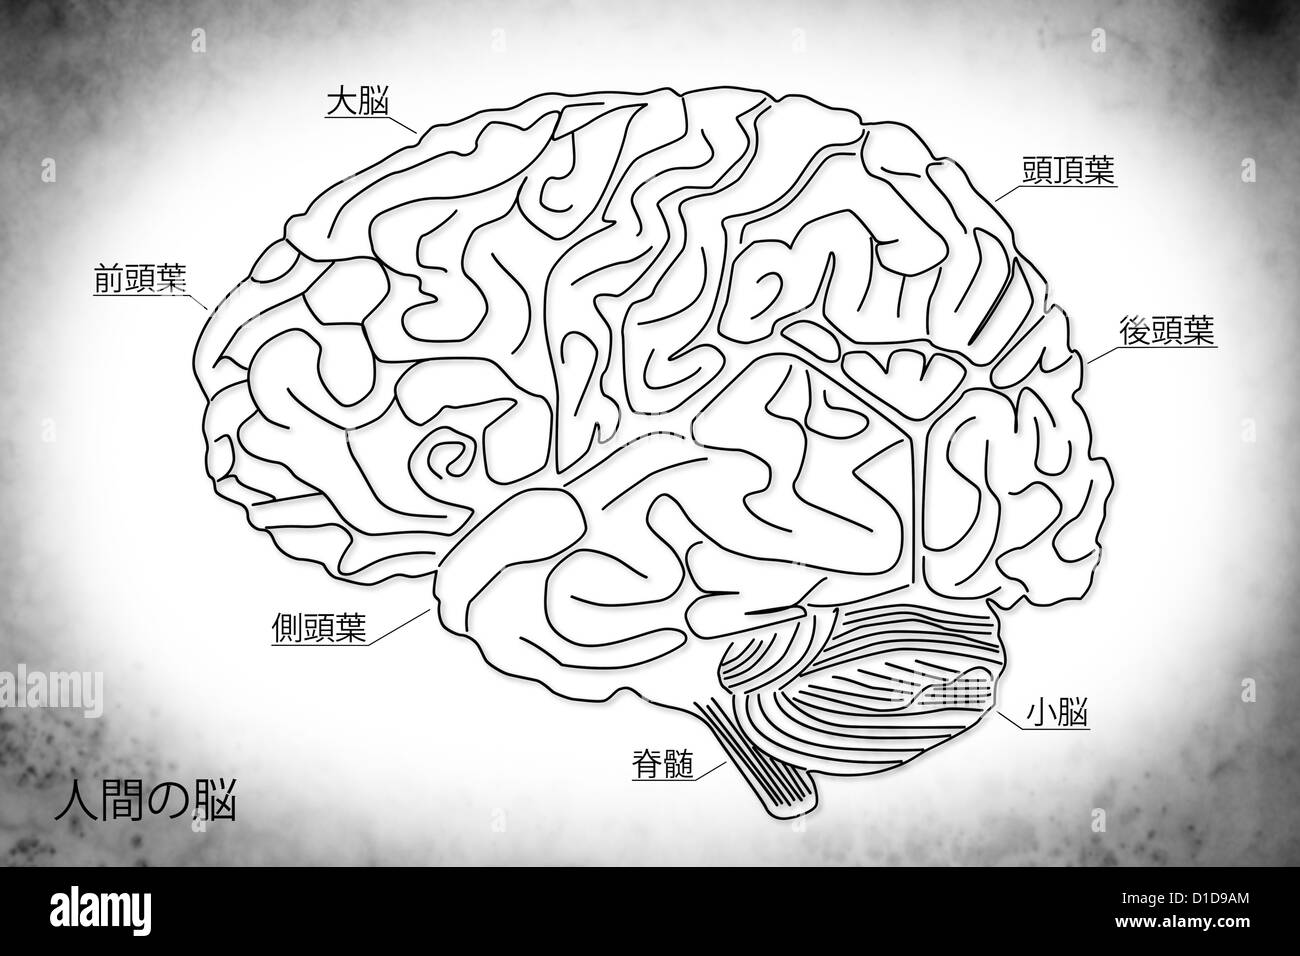 The human brain structure Stock Photo